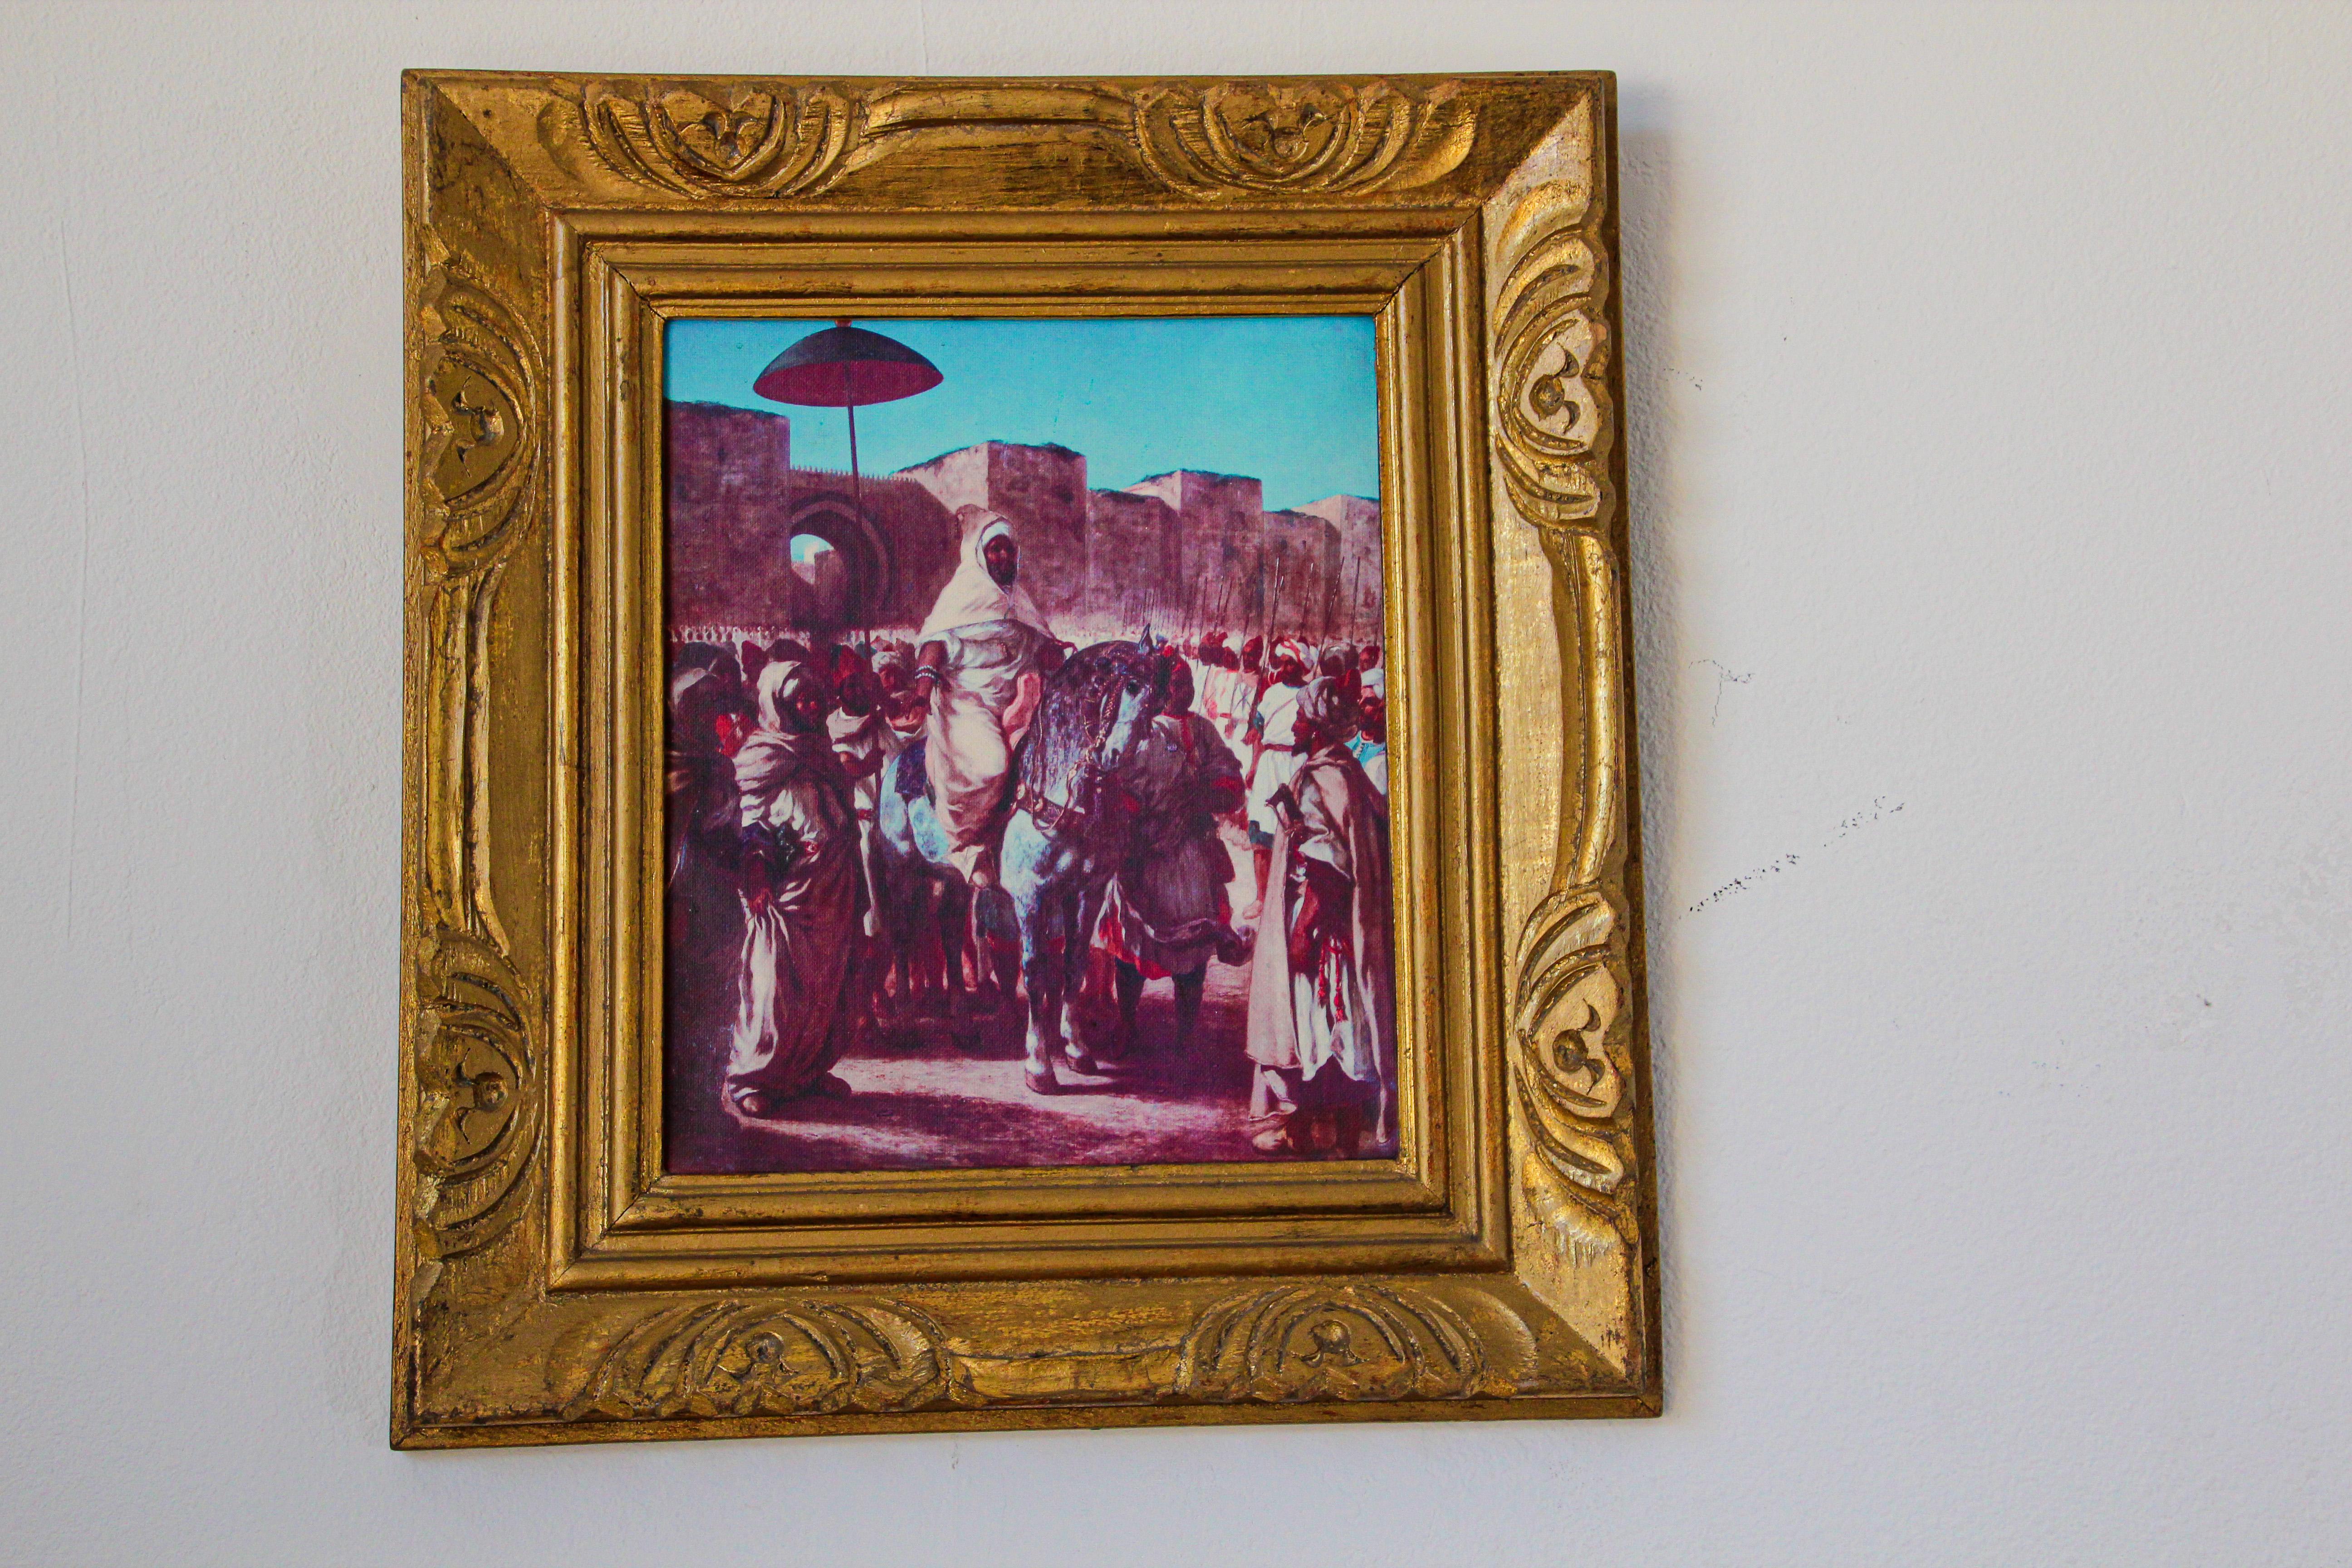 Orientalist Moroccan scene giclee painting of the King o Morocco.
French orientalist reproduction painting of Mohamed V coming back from exile with a classical wooden frame.
The frame is old the painting is a new giclee on canvas.
The